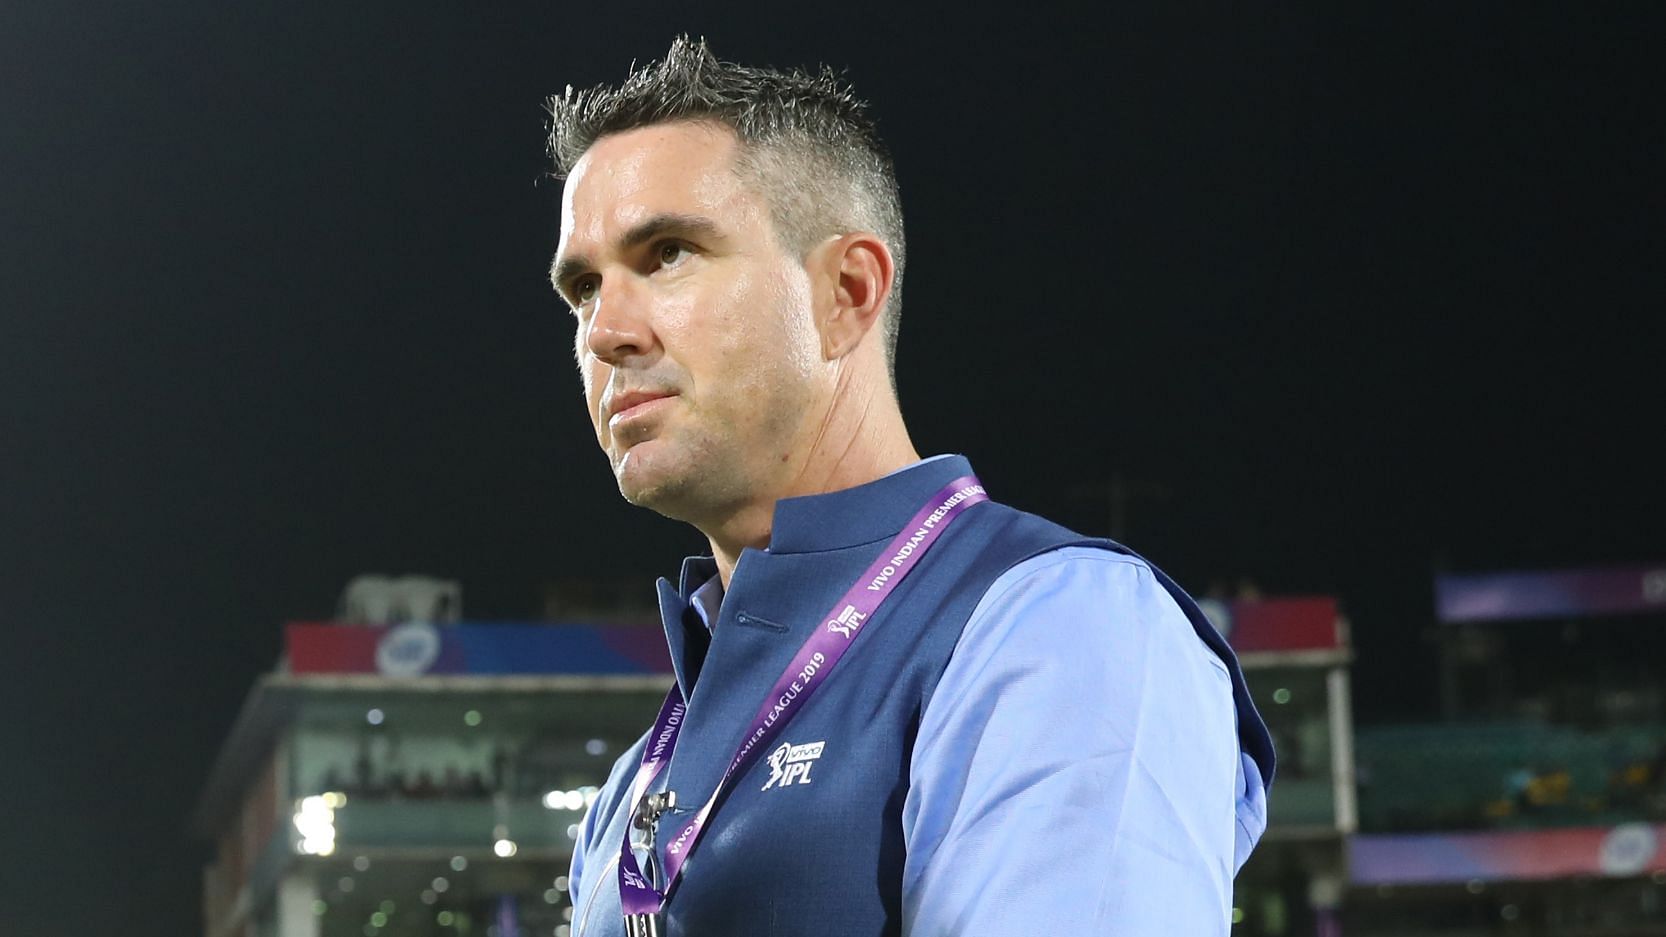 Kevin Pietersen has said he still “truly believes” IPL should happen the moment there is a window of opportunity.